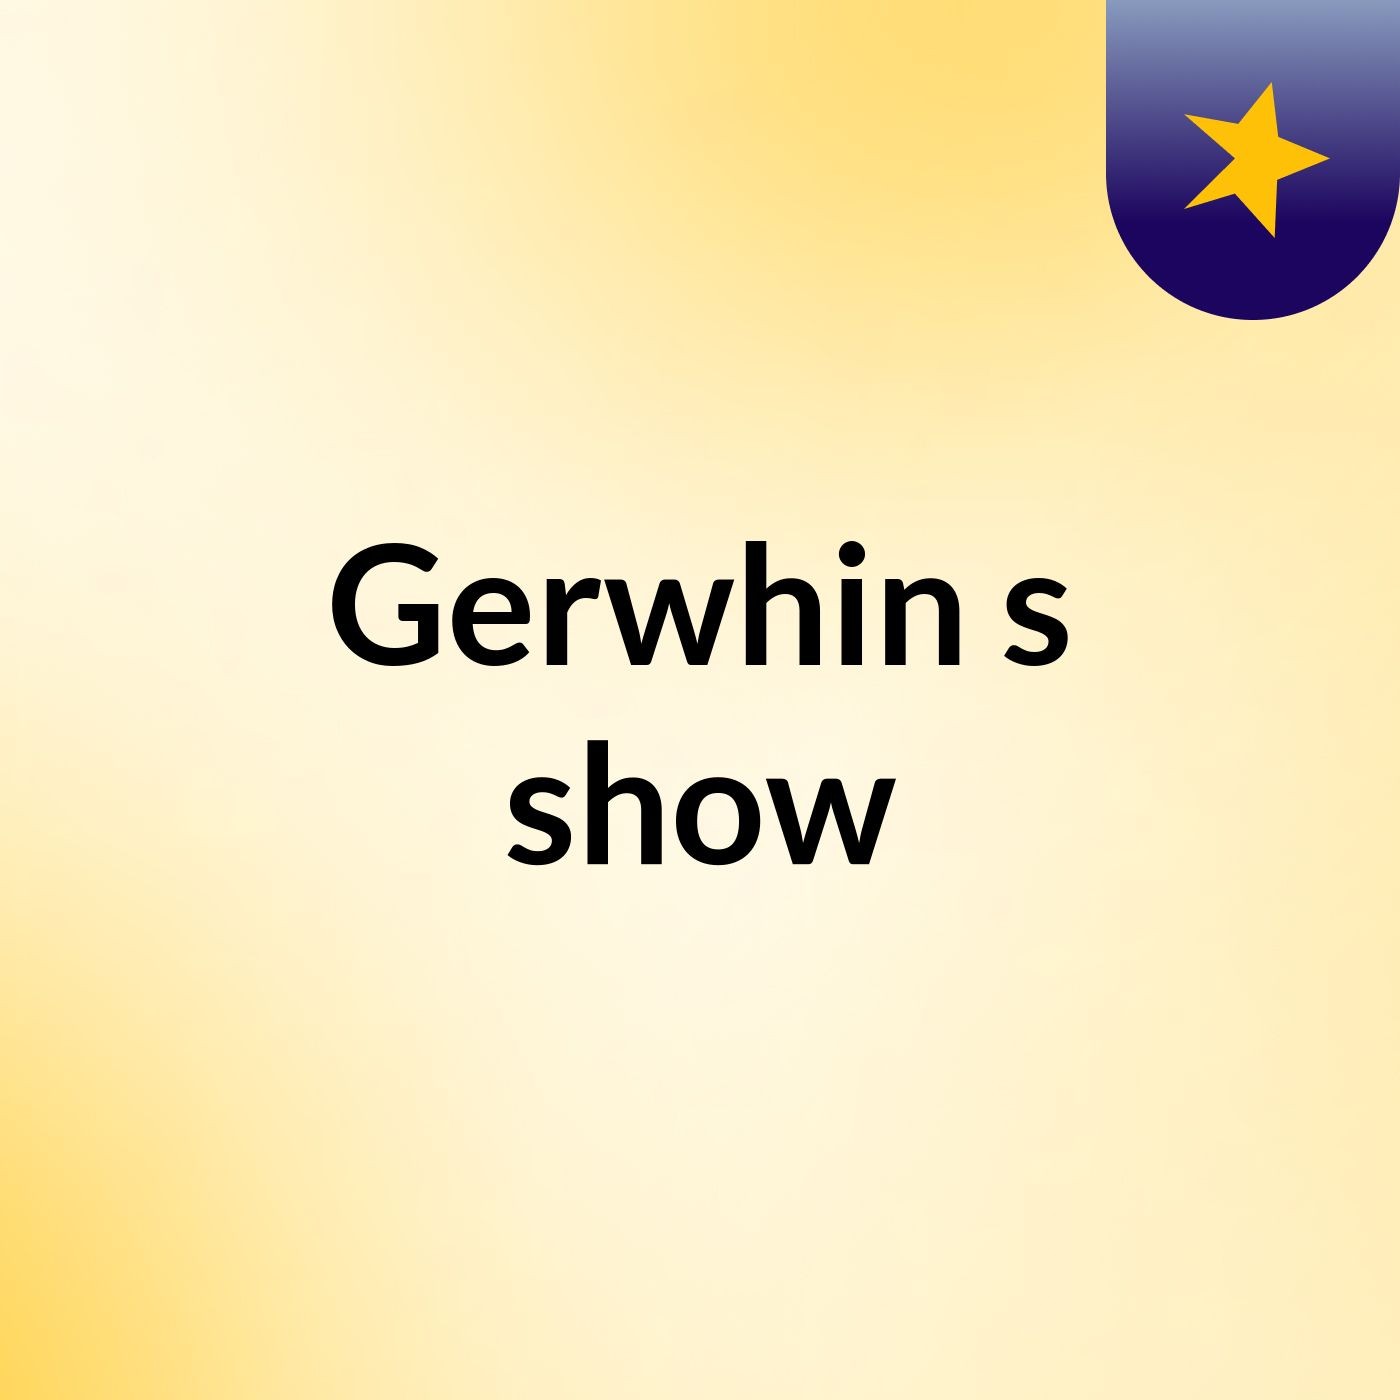 Gerwhin's show